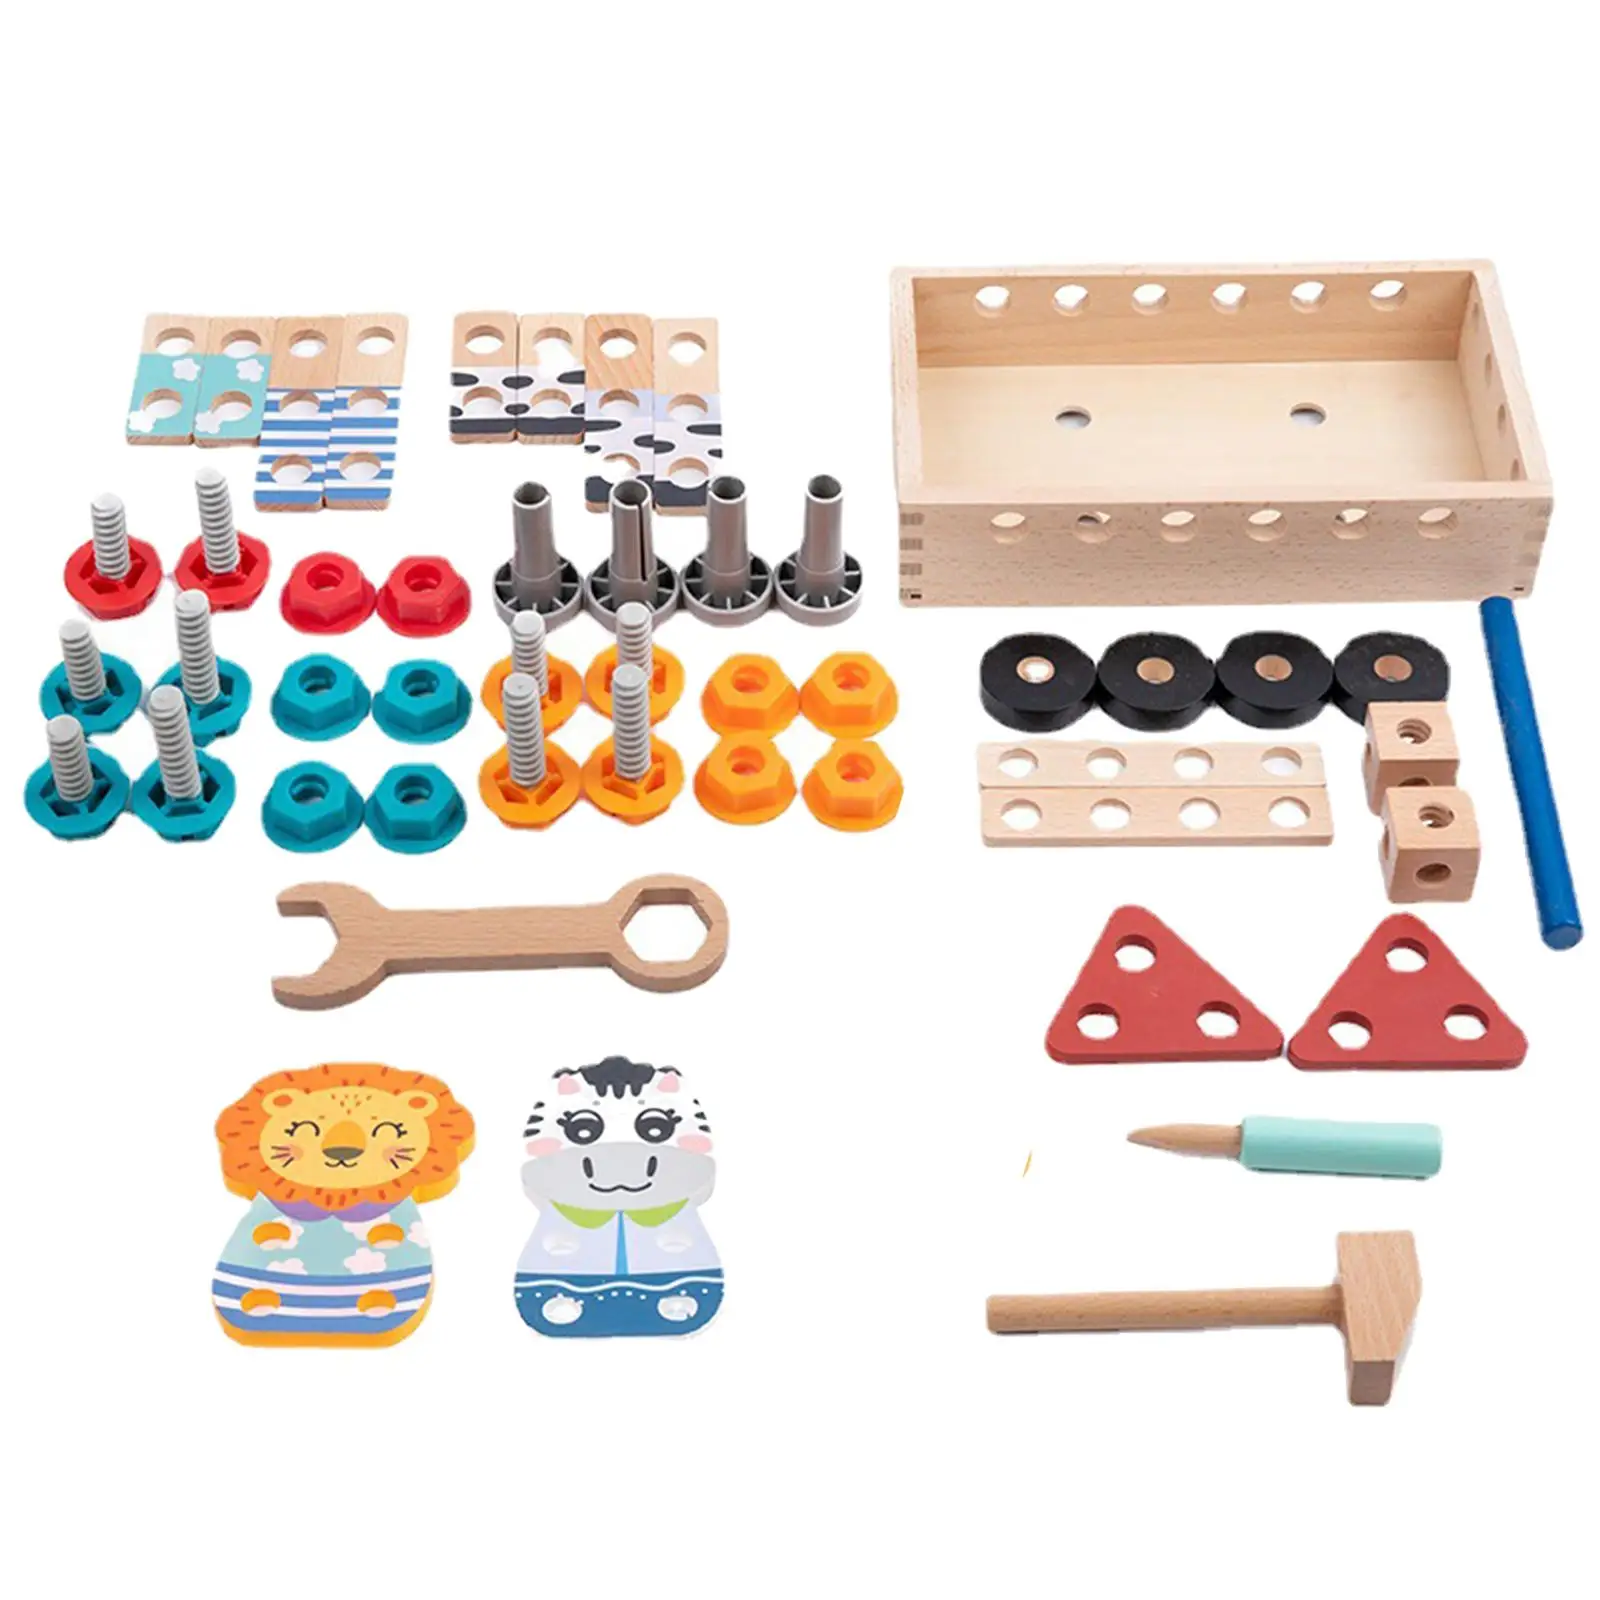 Toddler Tool Set Creative Basic Skills Montessori DIY Construction Toy for Outdoor Indoor Education Role education Learning